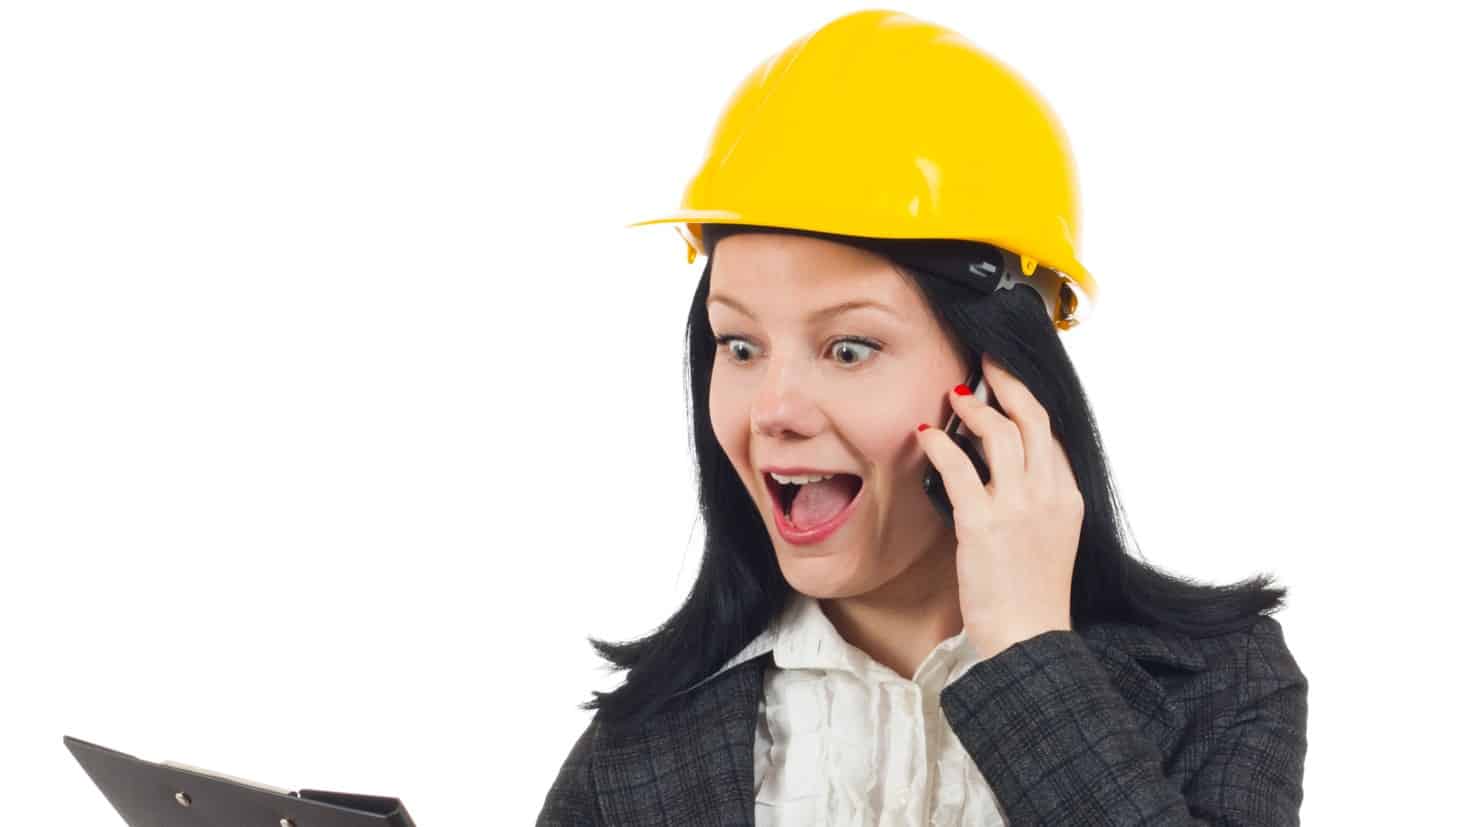 asx share price rise represented by woman in hard hat on phone looking excited